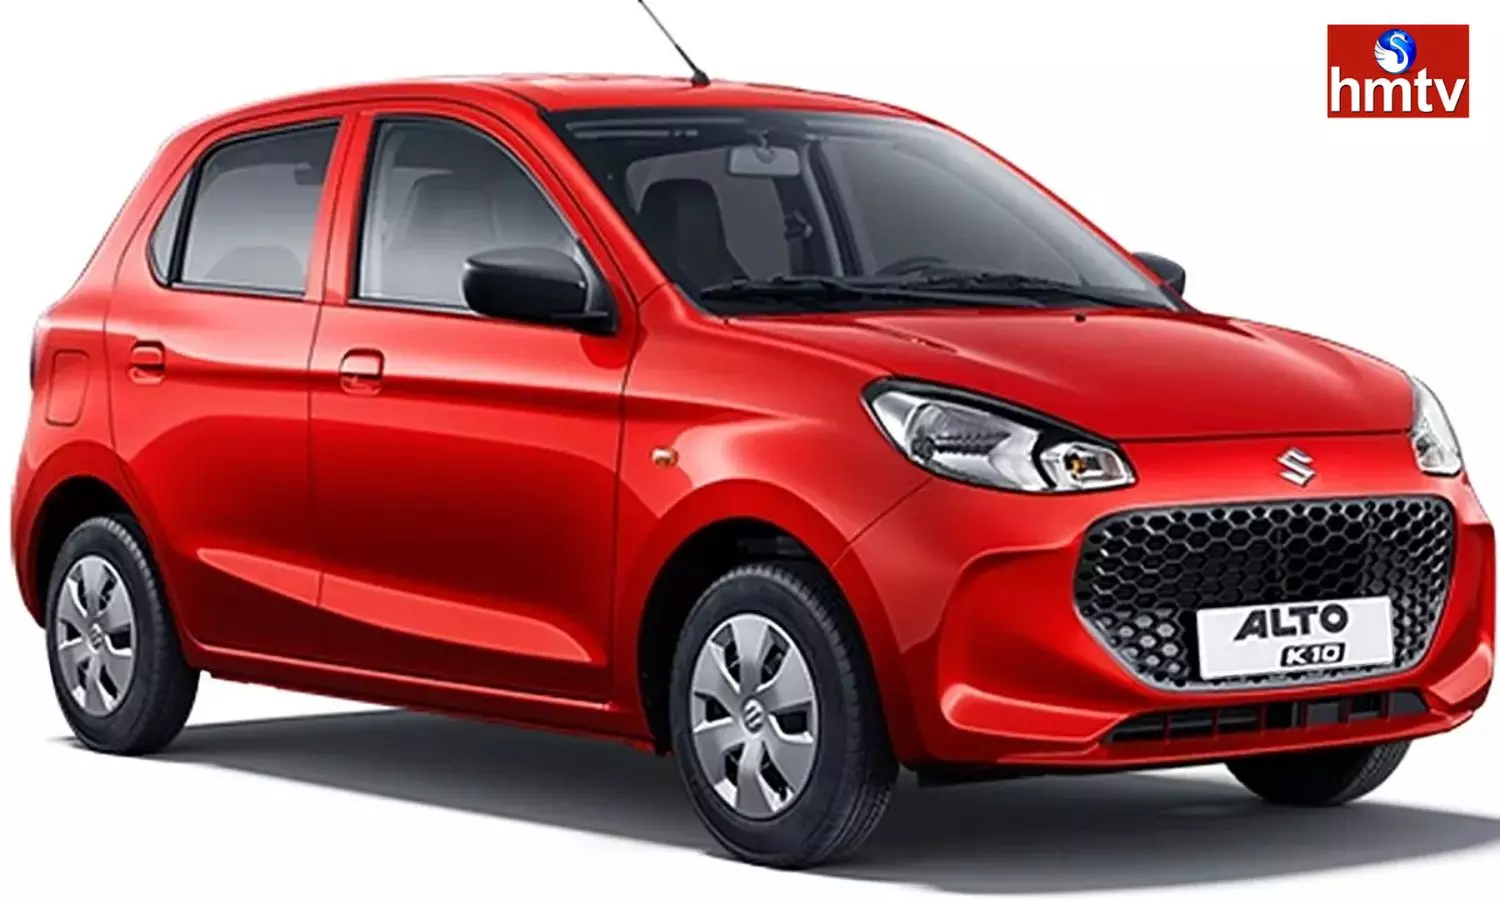 Alto k10 Affordable Car Is Better Than Expensive Bike Worth 4-5 lakh Check Price And Features